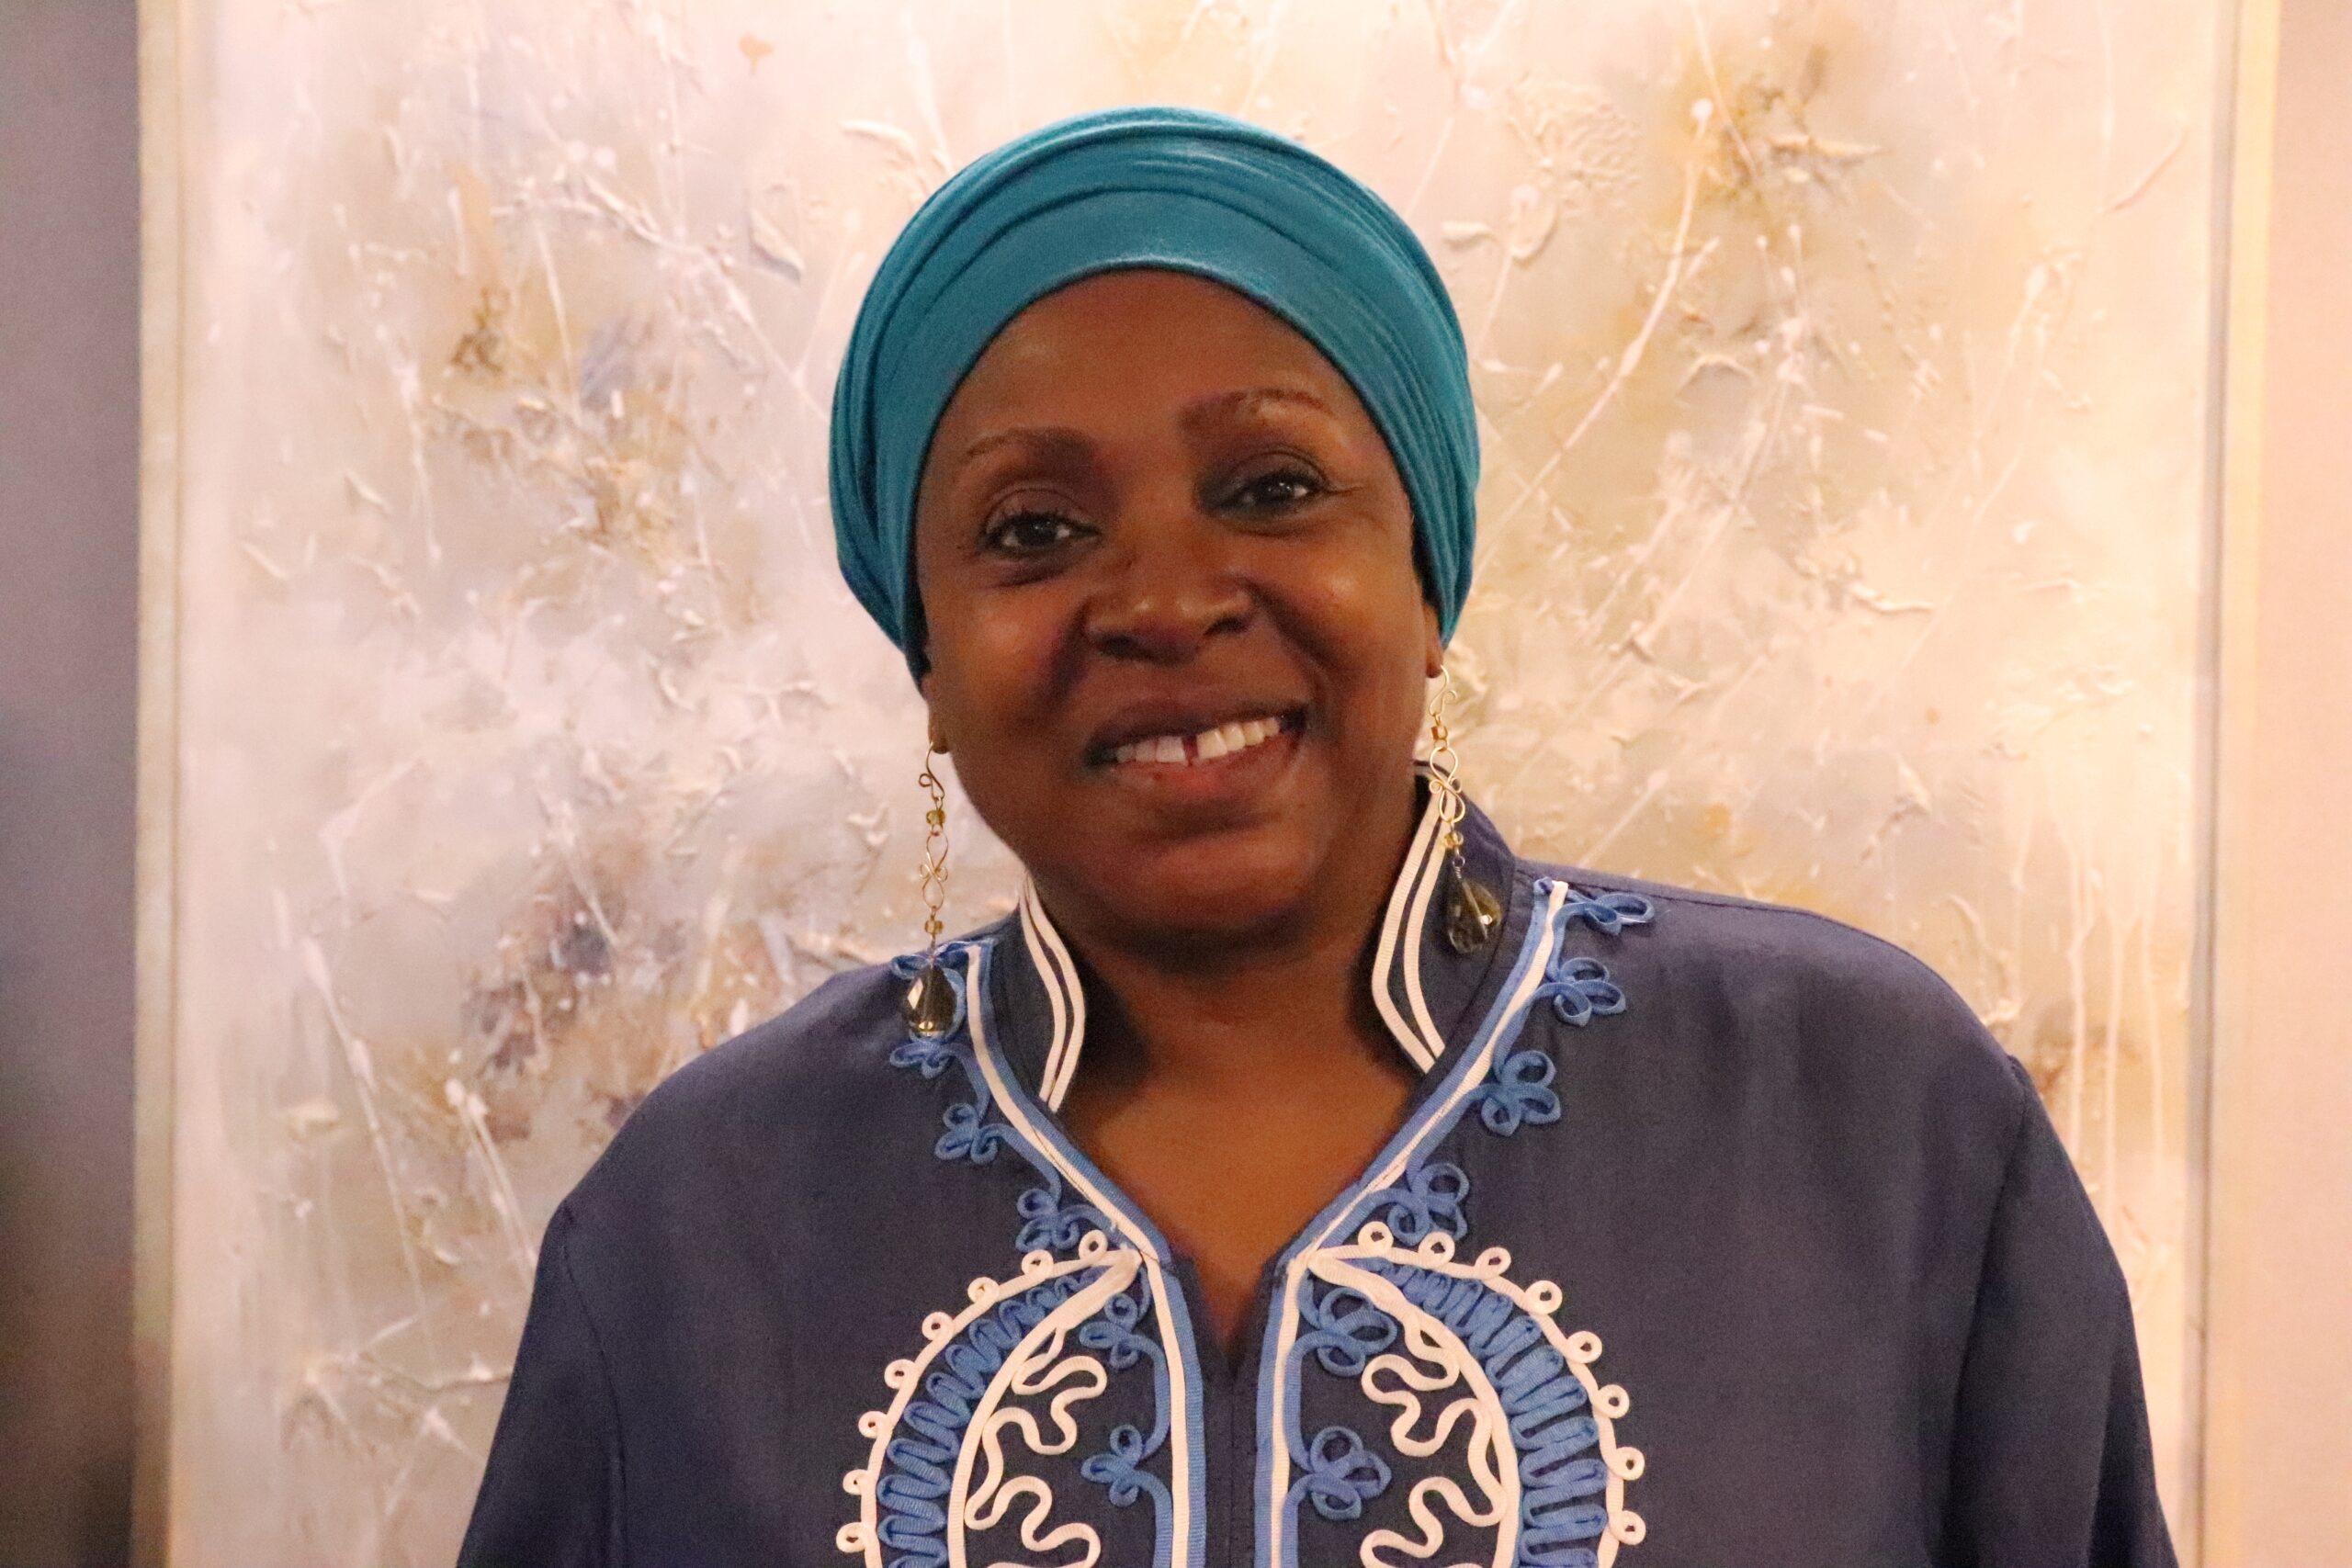 Black lady in blue head wrap smiles for the camera